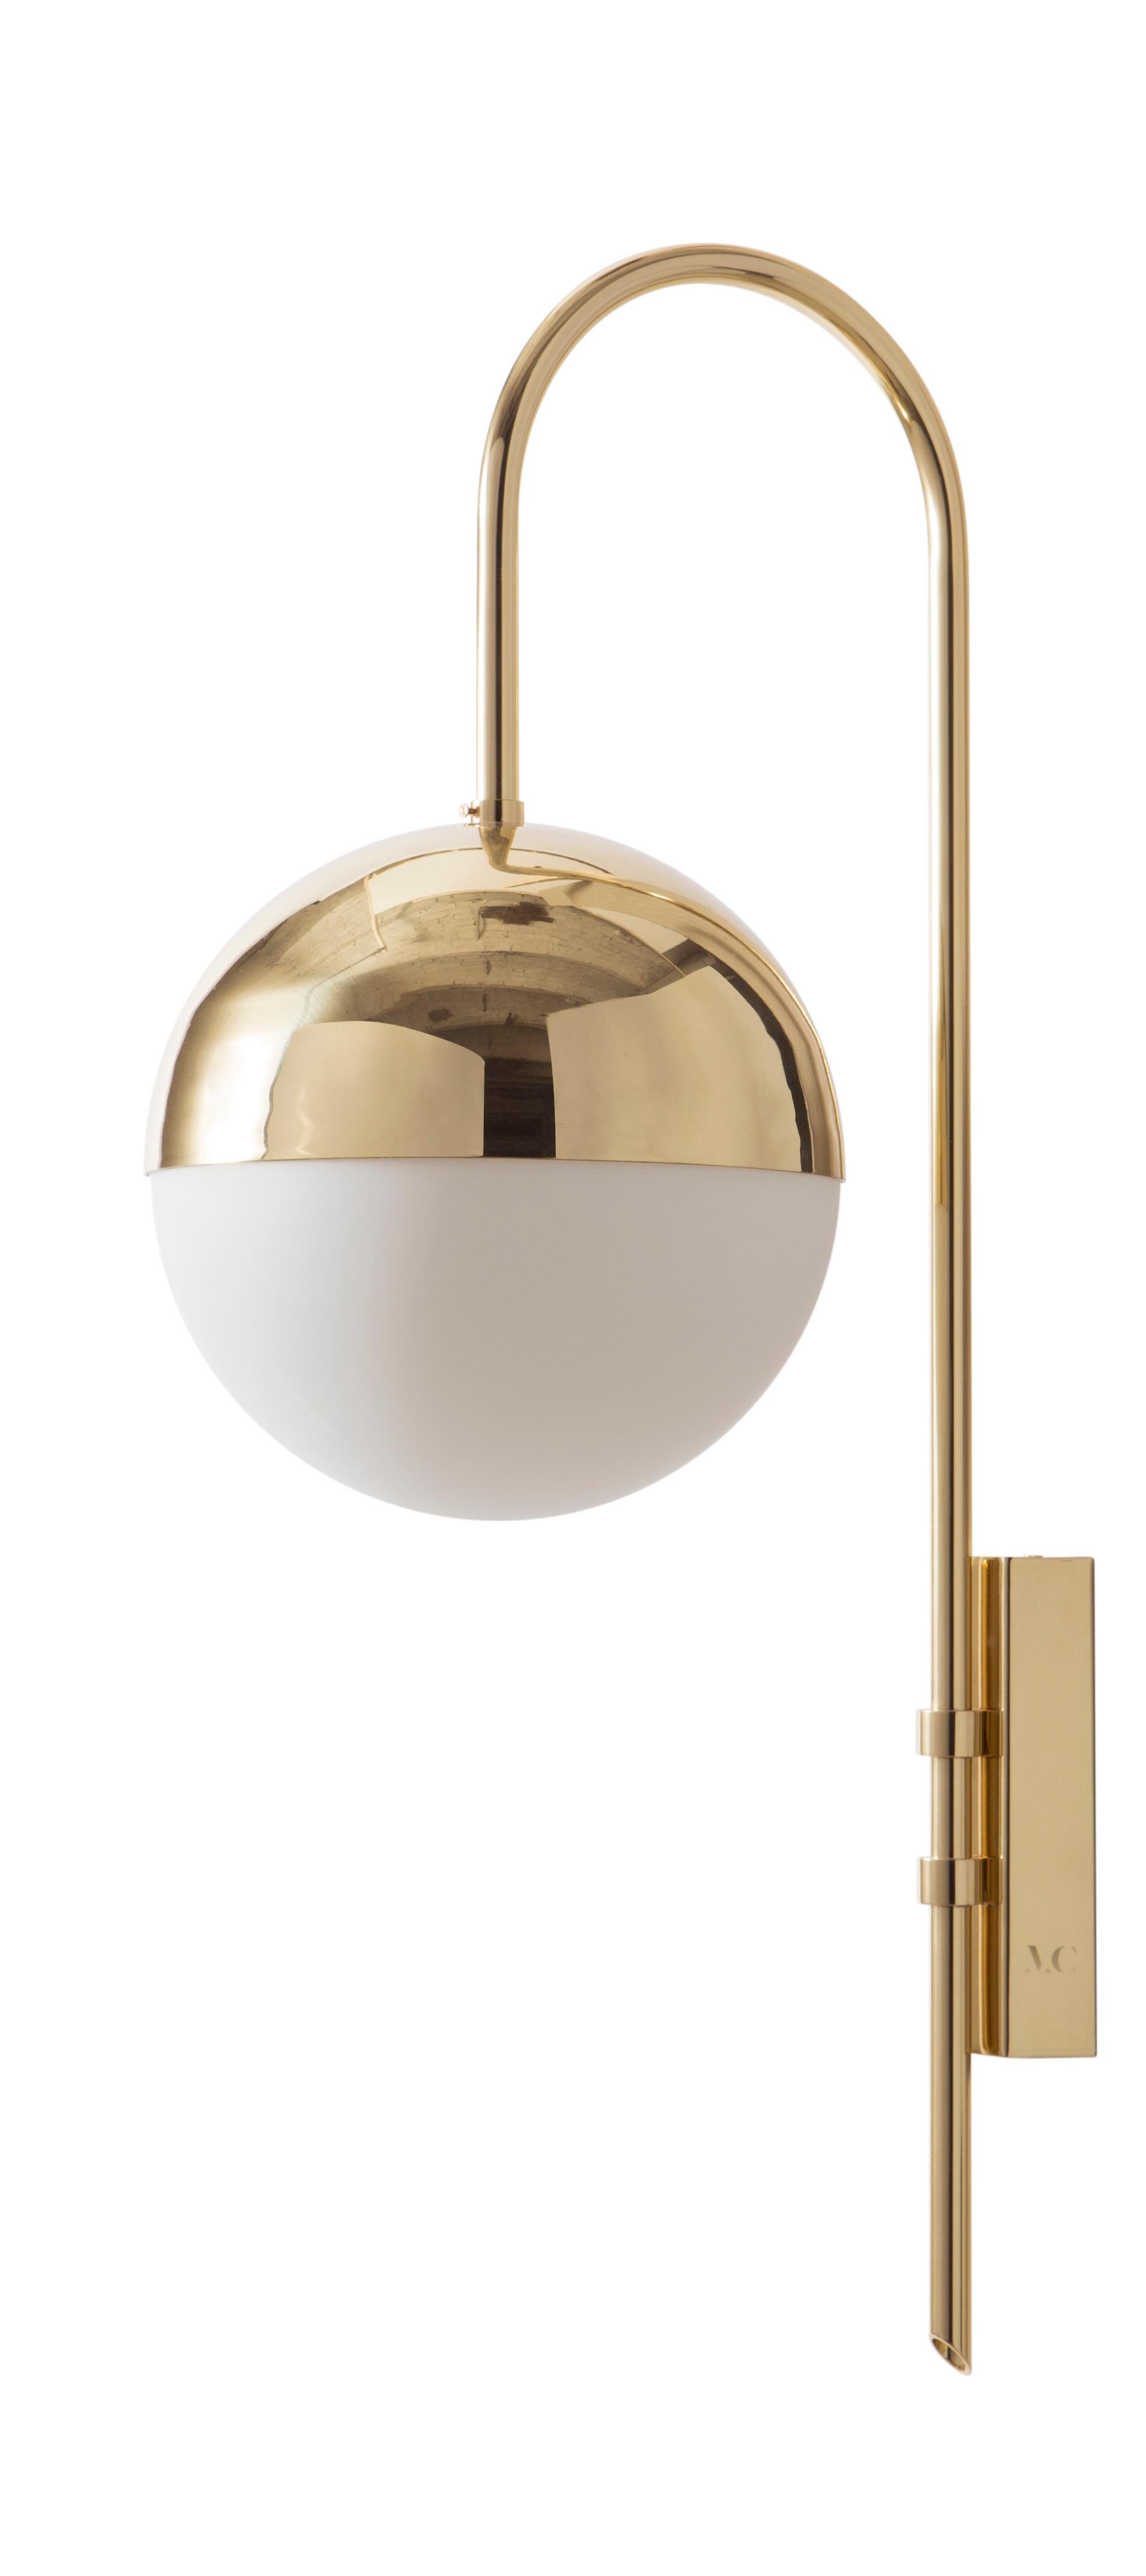 Brass wall lamp 01 by Magic Circus Editions
Dimensions: H 77 x W 25 x D 36.5 cm
Materials: Smooth brass, mouth blown glass

Available finishes: Brass, nickel
All our lamps can be wired according to each country. If sold to the USA it will be